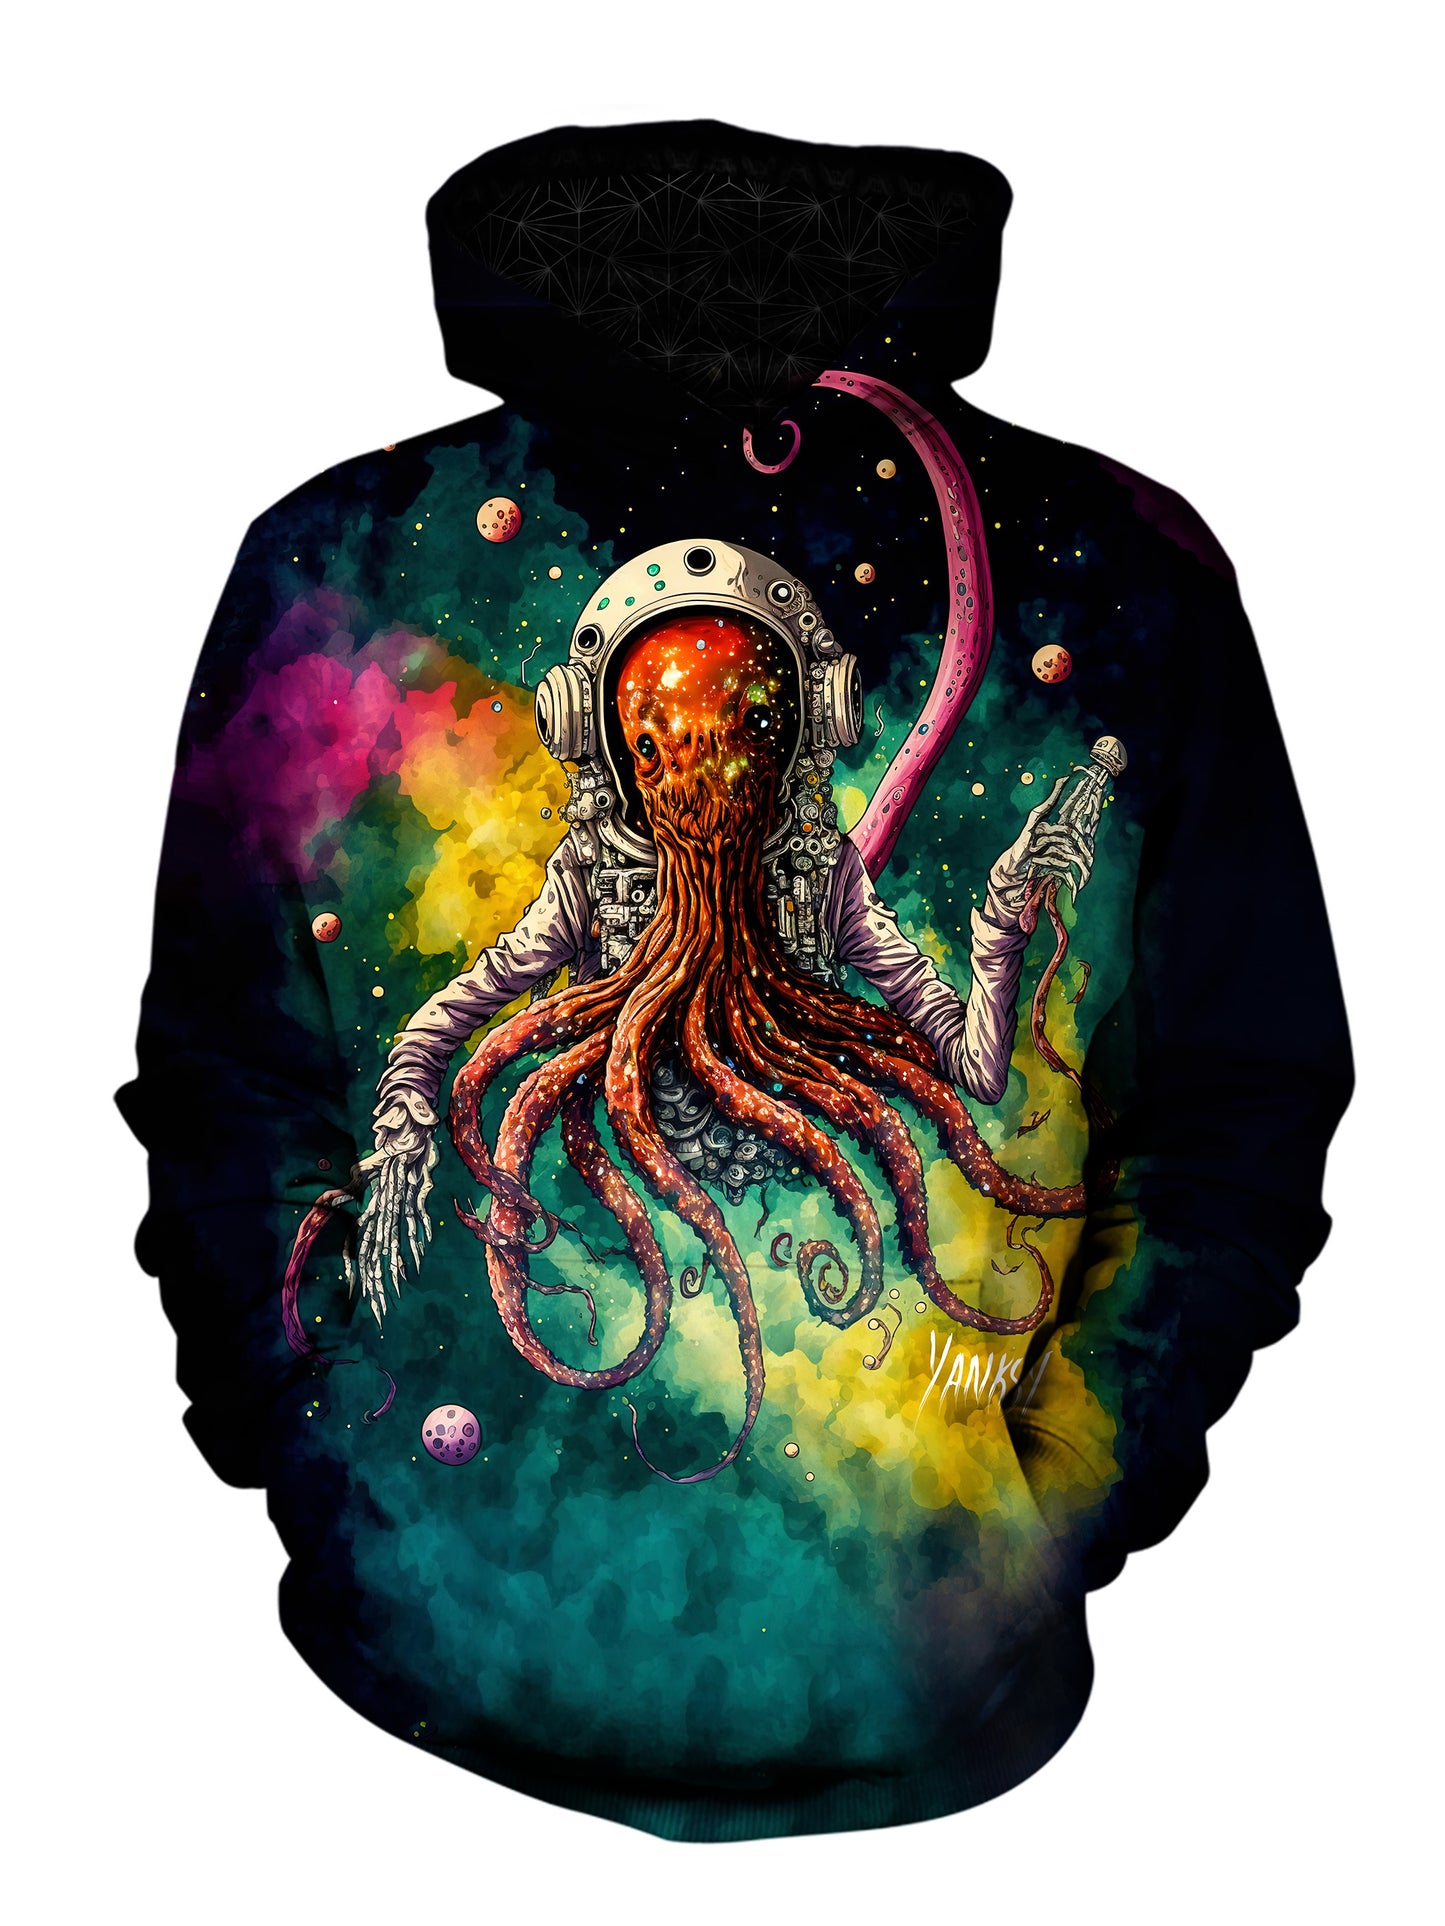 Stay warm and stylish at your next festival or rave with this comfortable pullover hoodie